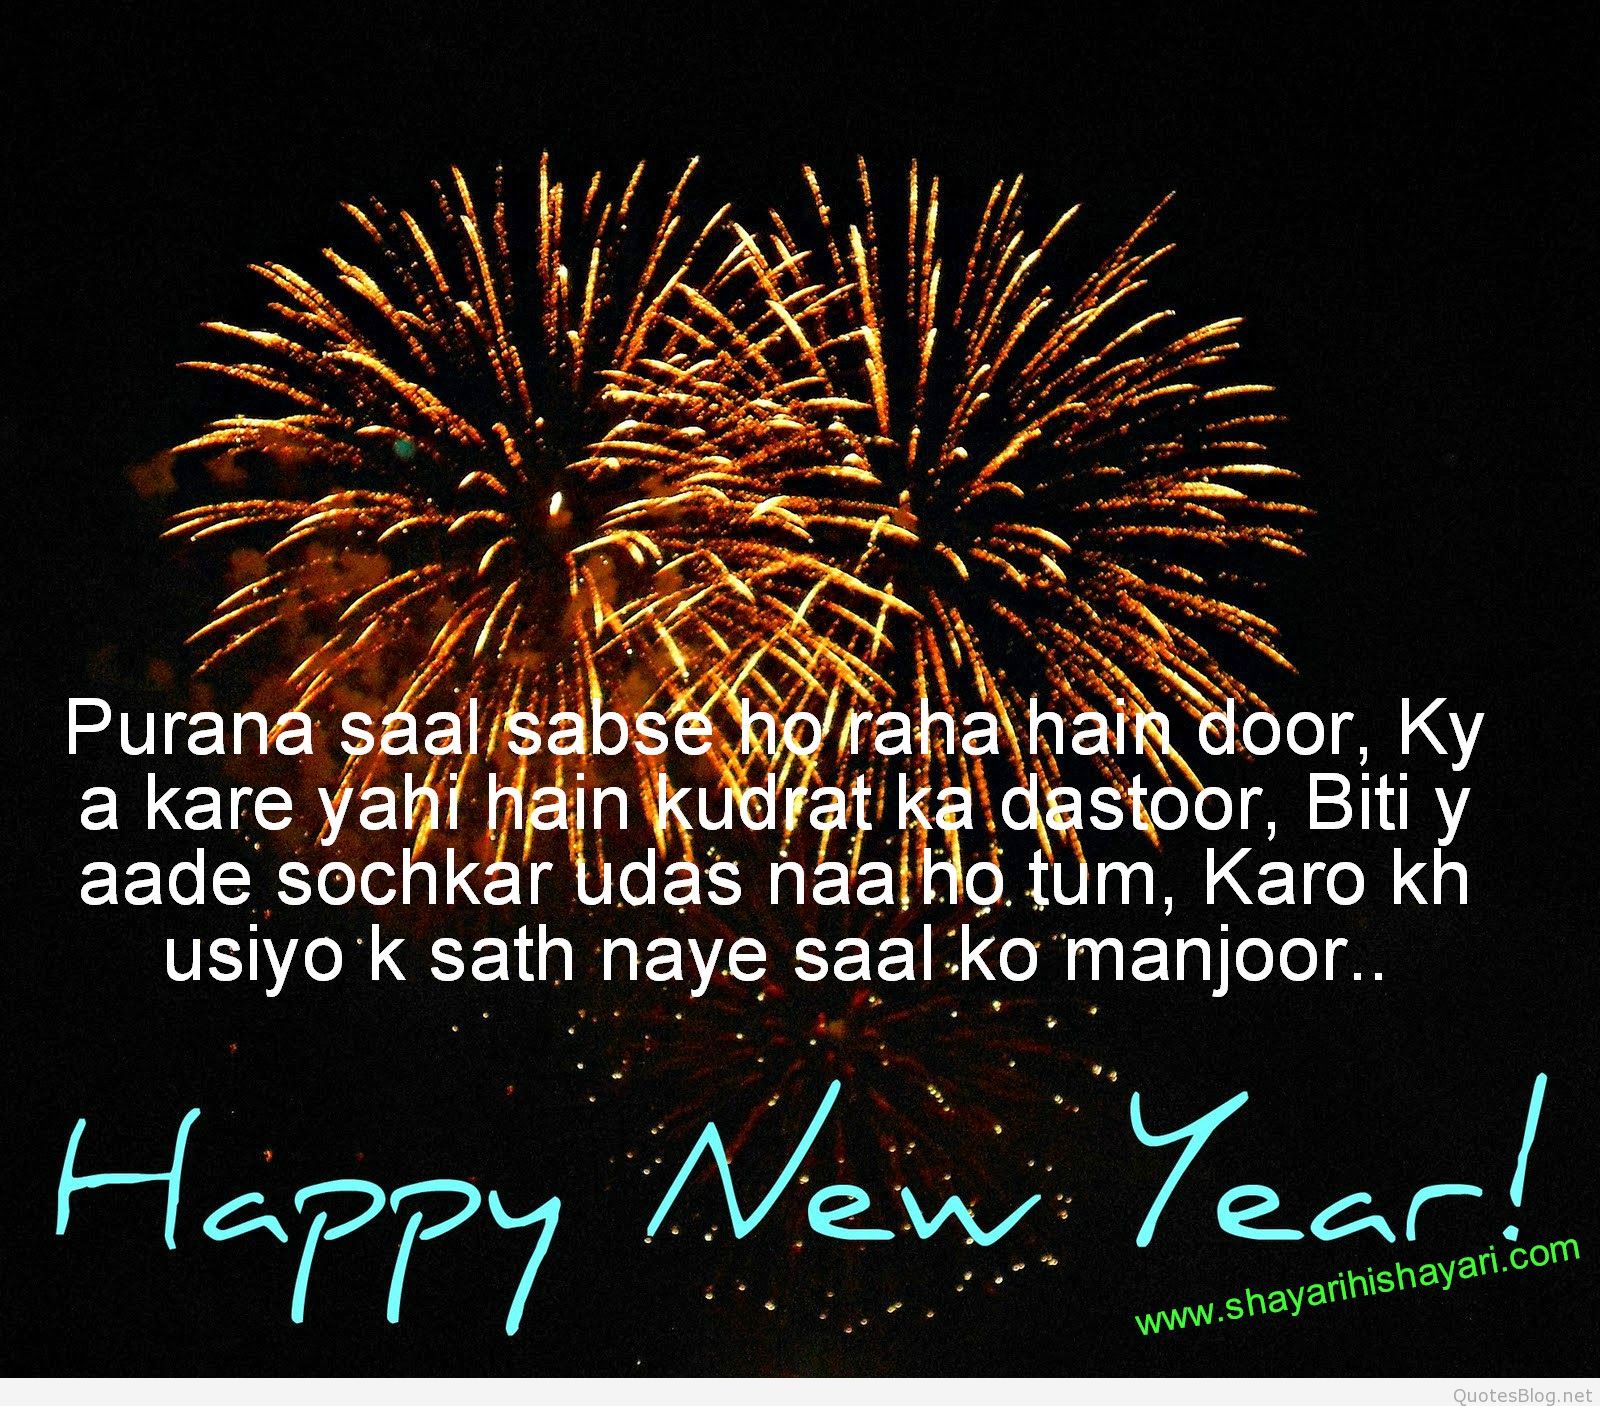 Free download Hindi Happy new year QuotesBlognet [1600x1406] for your